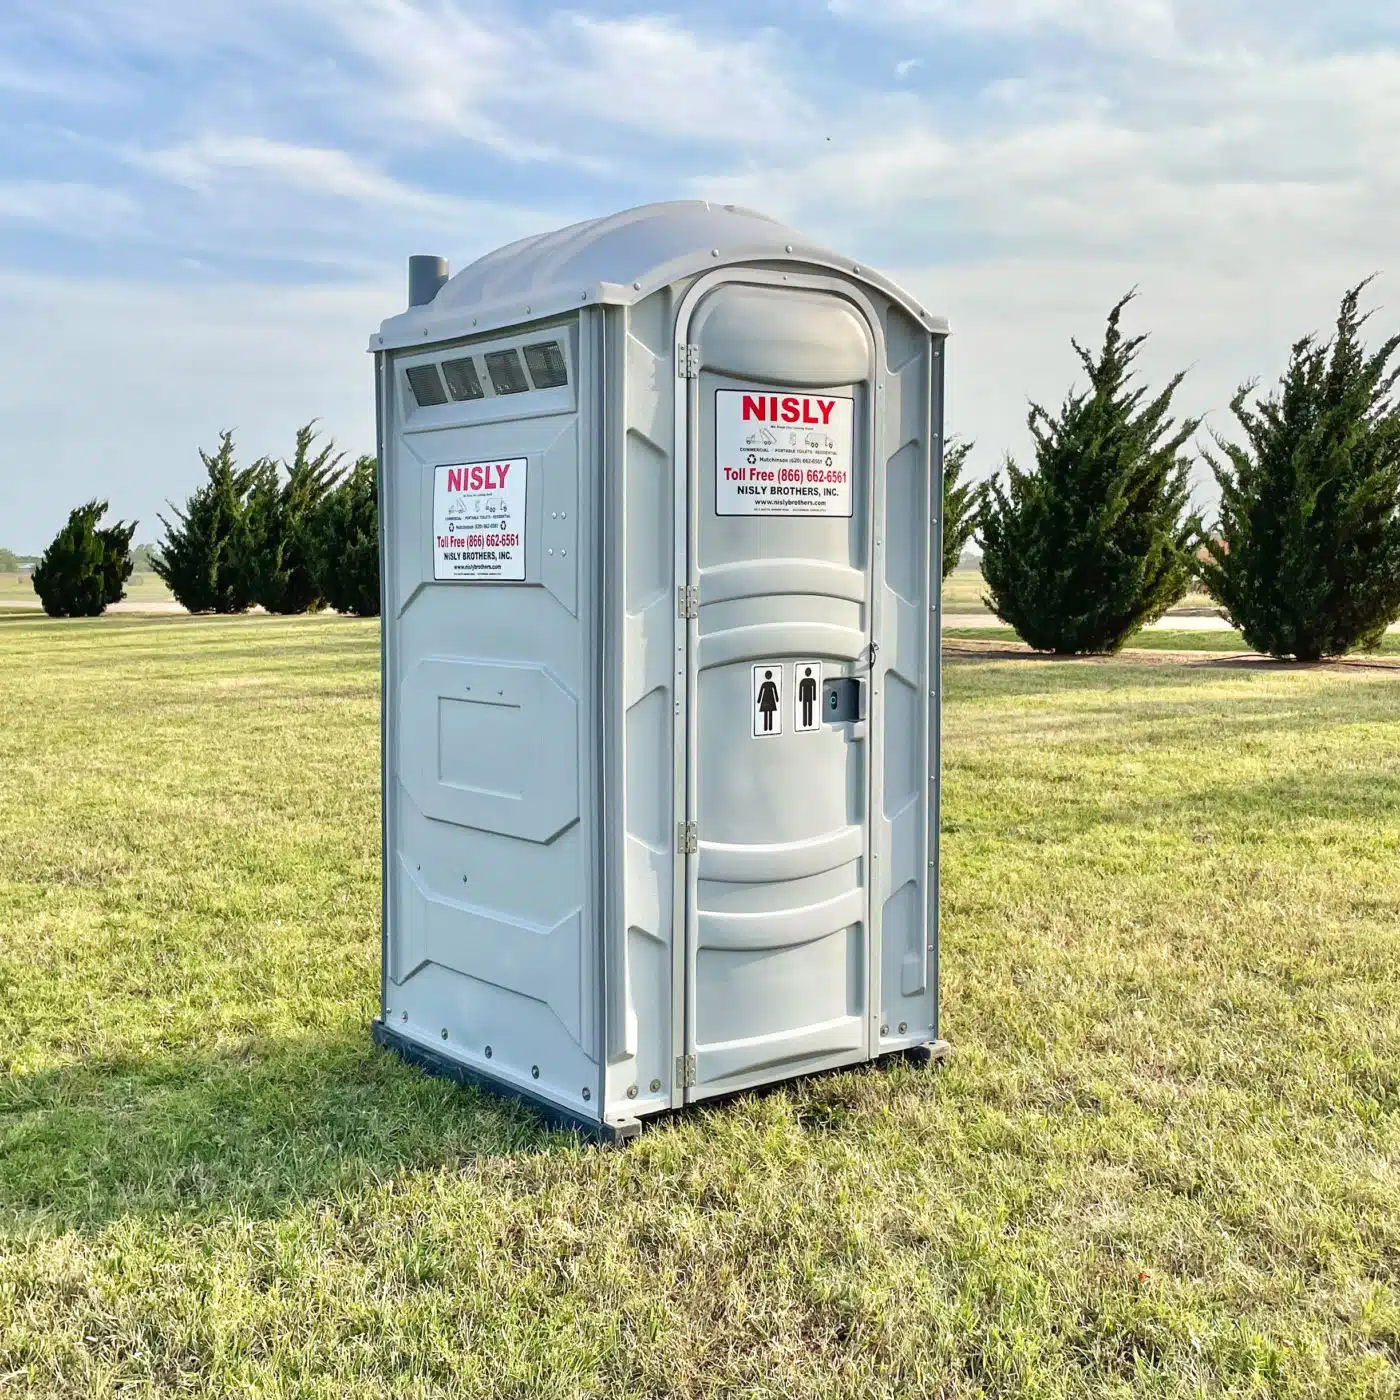 Portable-restroom-for-rent-in-central-kansas-many-porta-potty-available